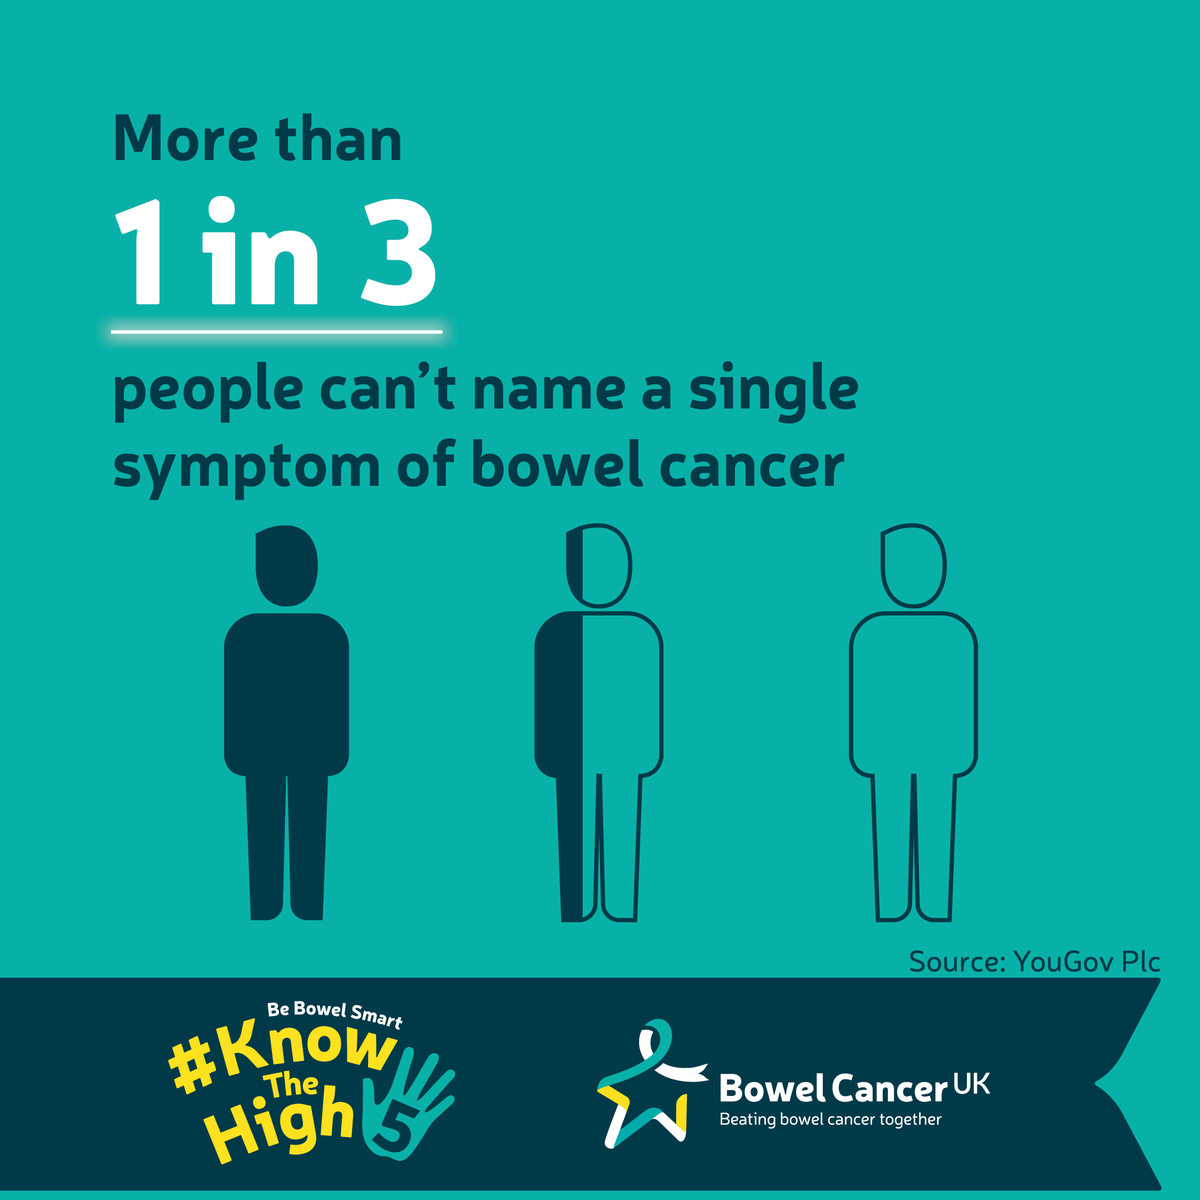 Text reads: More than 1 in 3 people can't name a single symptom of bowel cancer